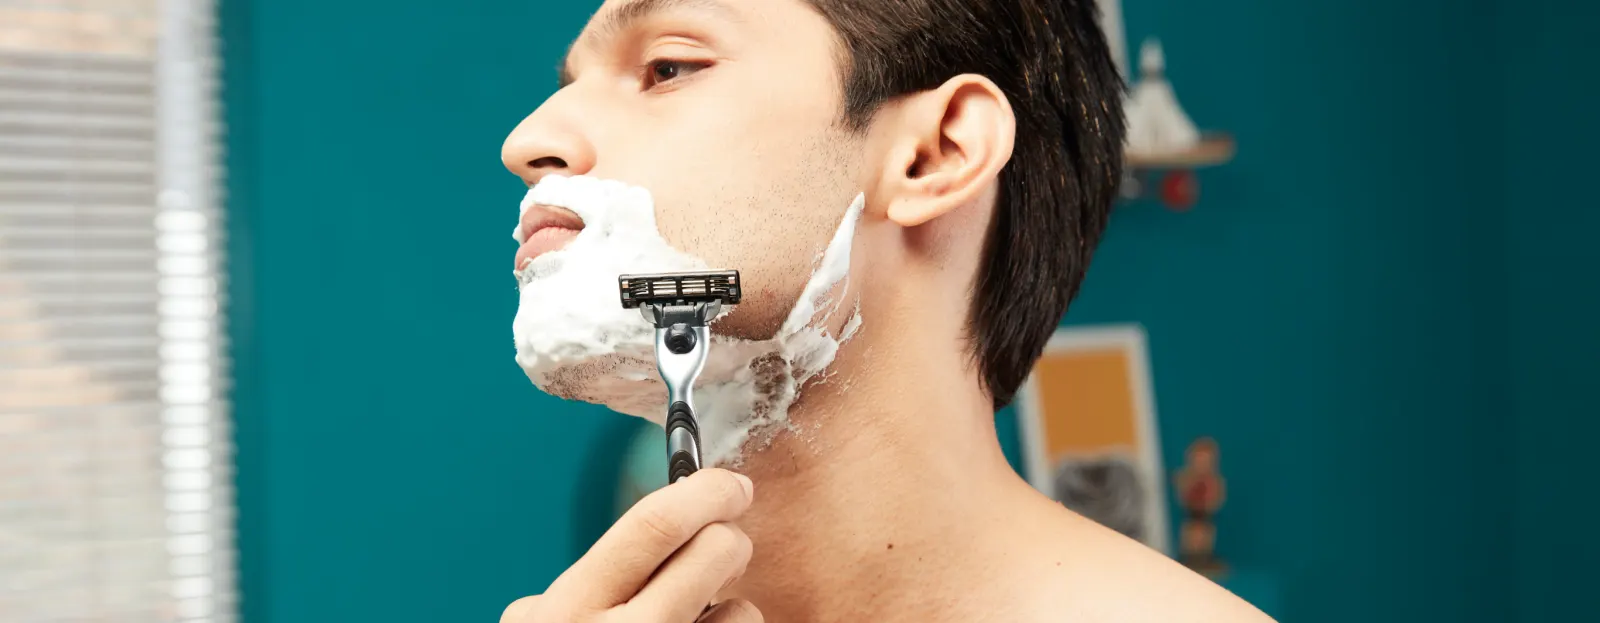 How to avoid getting spots after shaving?